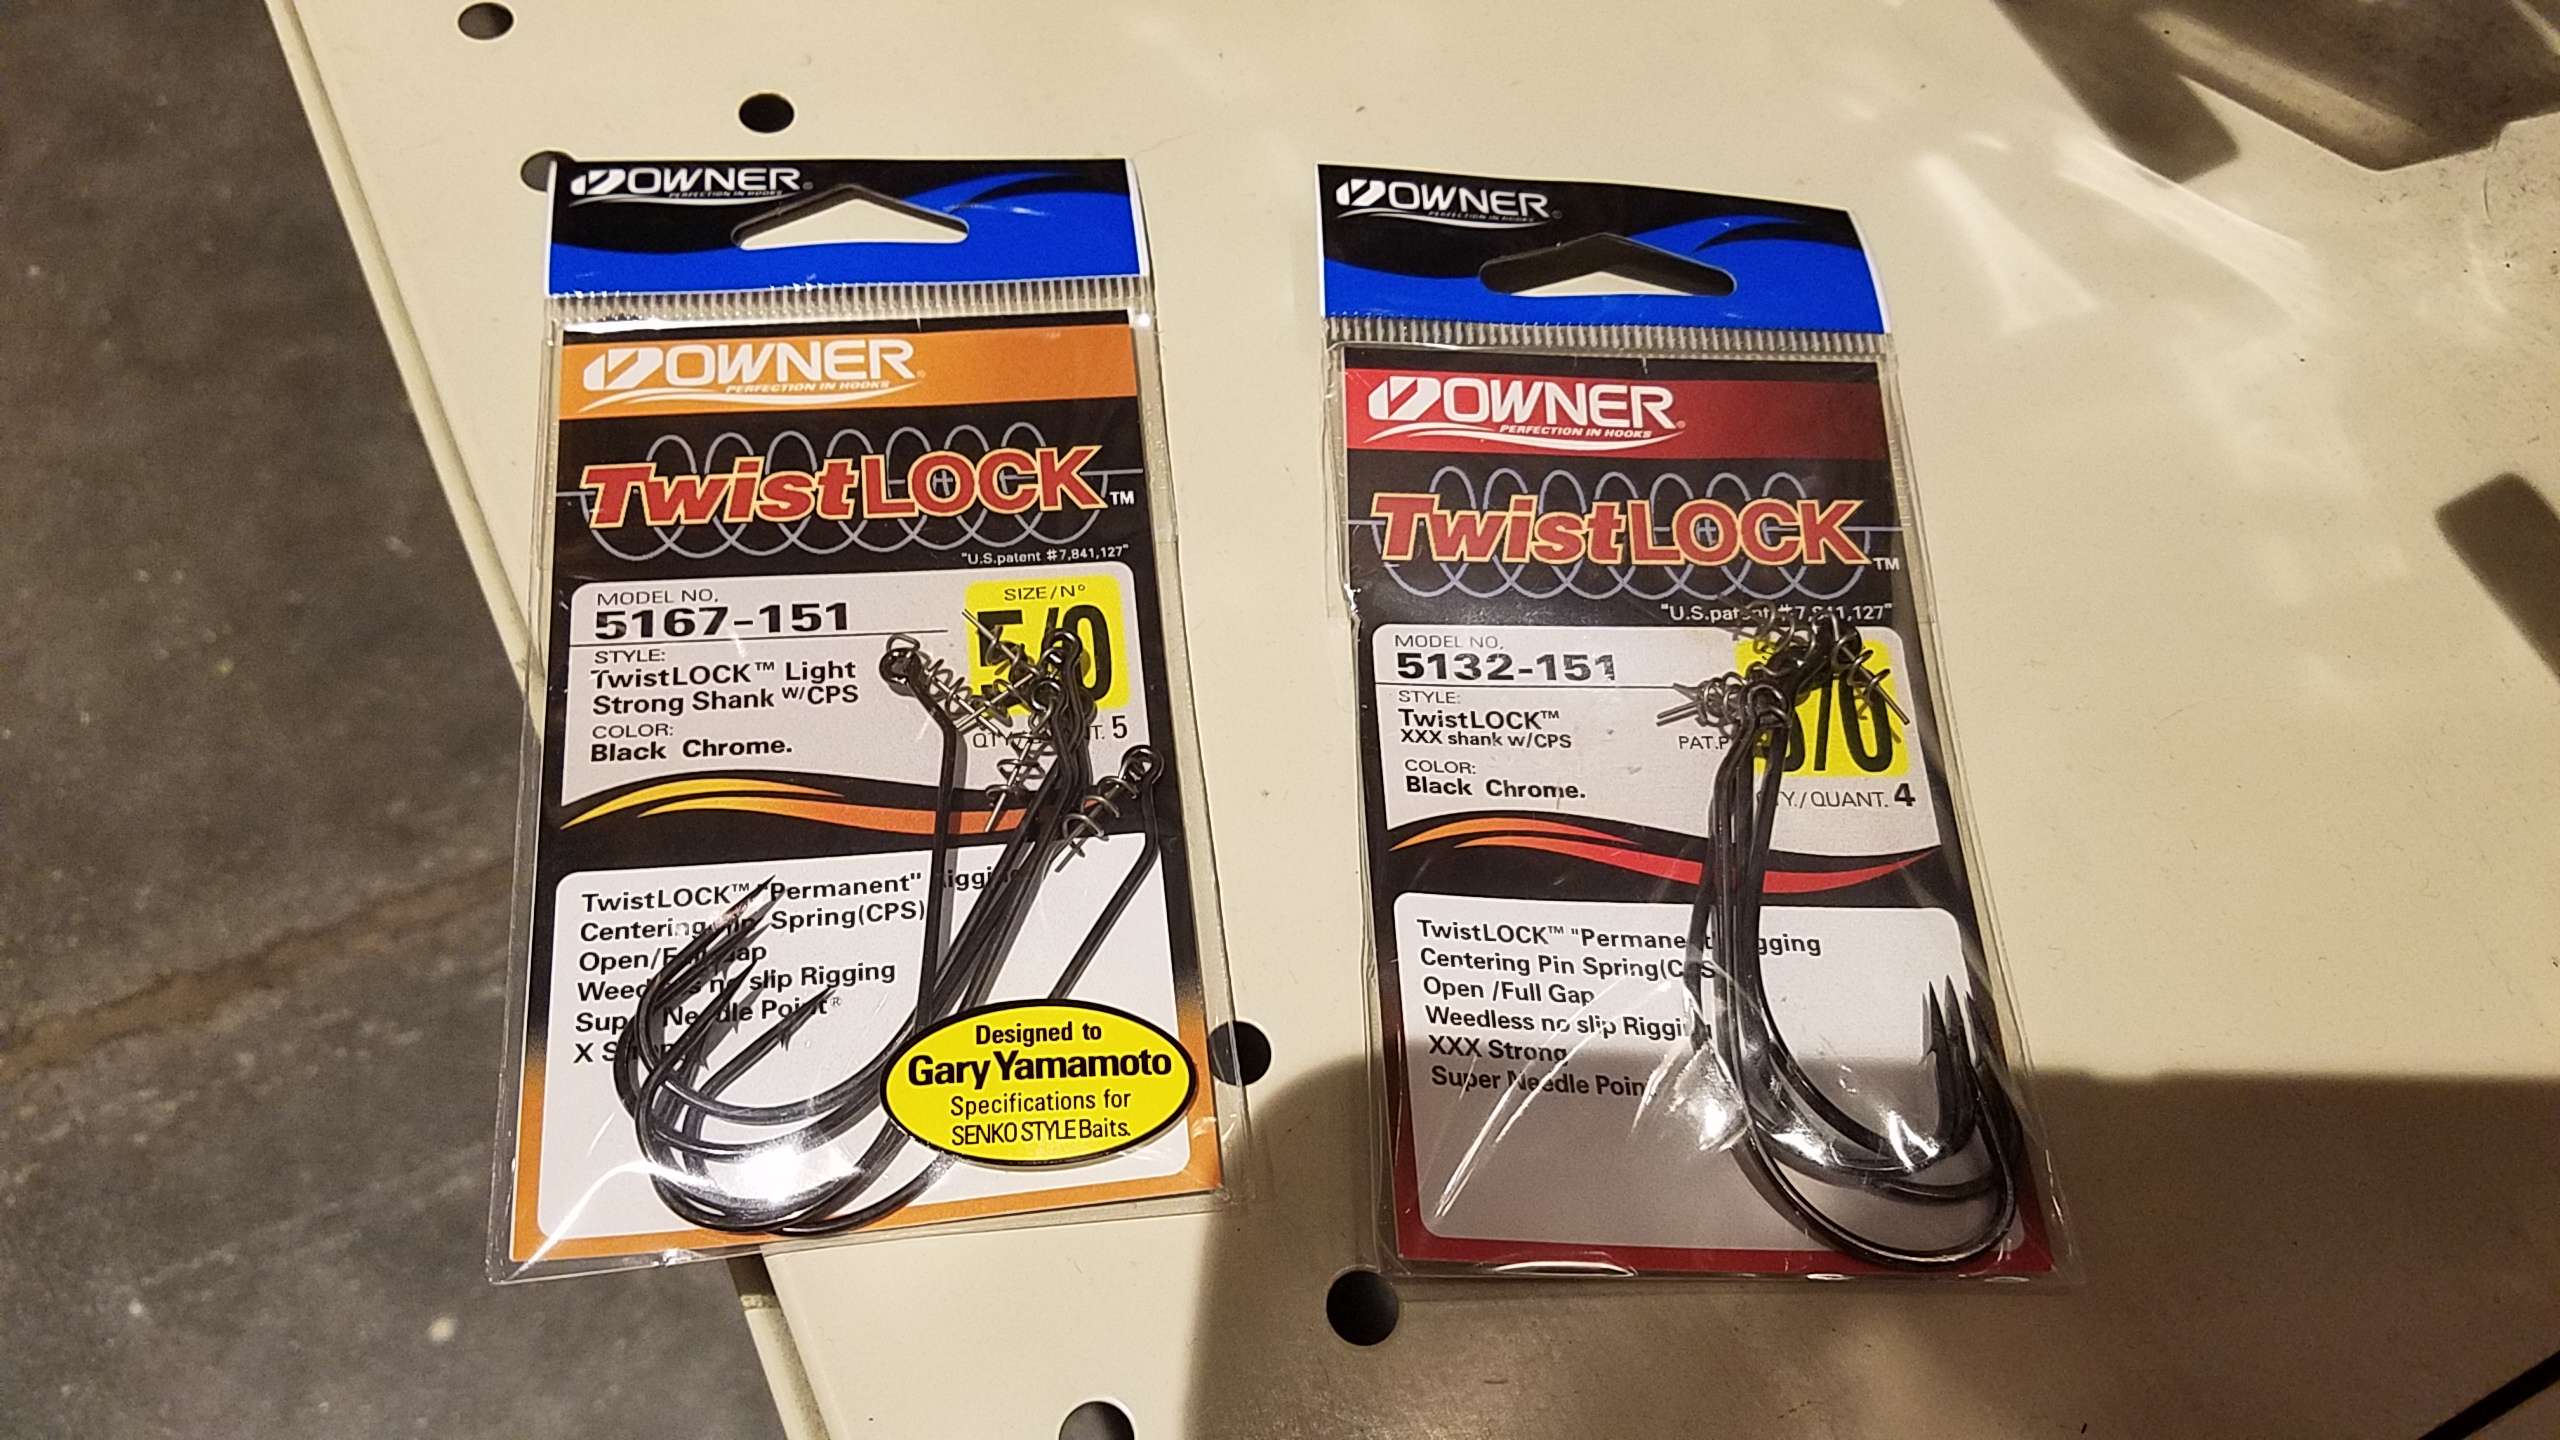 I need help with these Owner hooks, couple of questions - Fishing